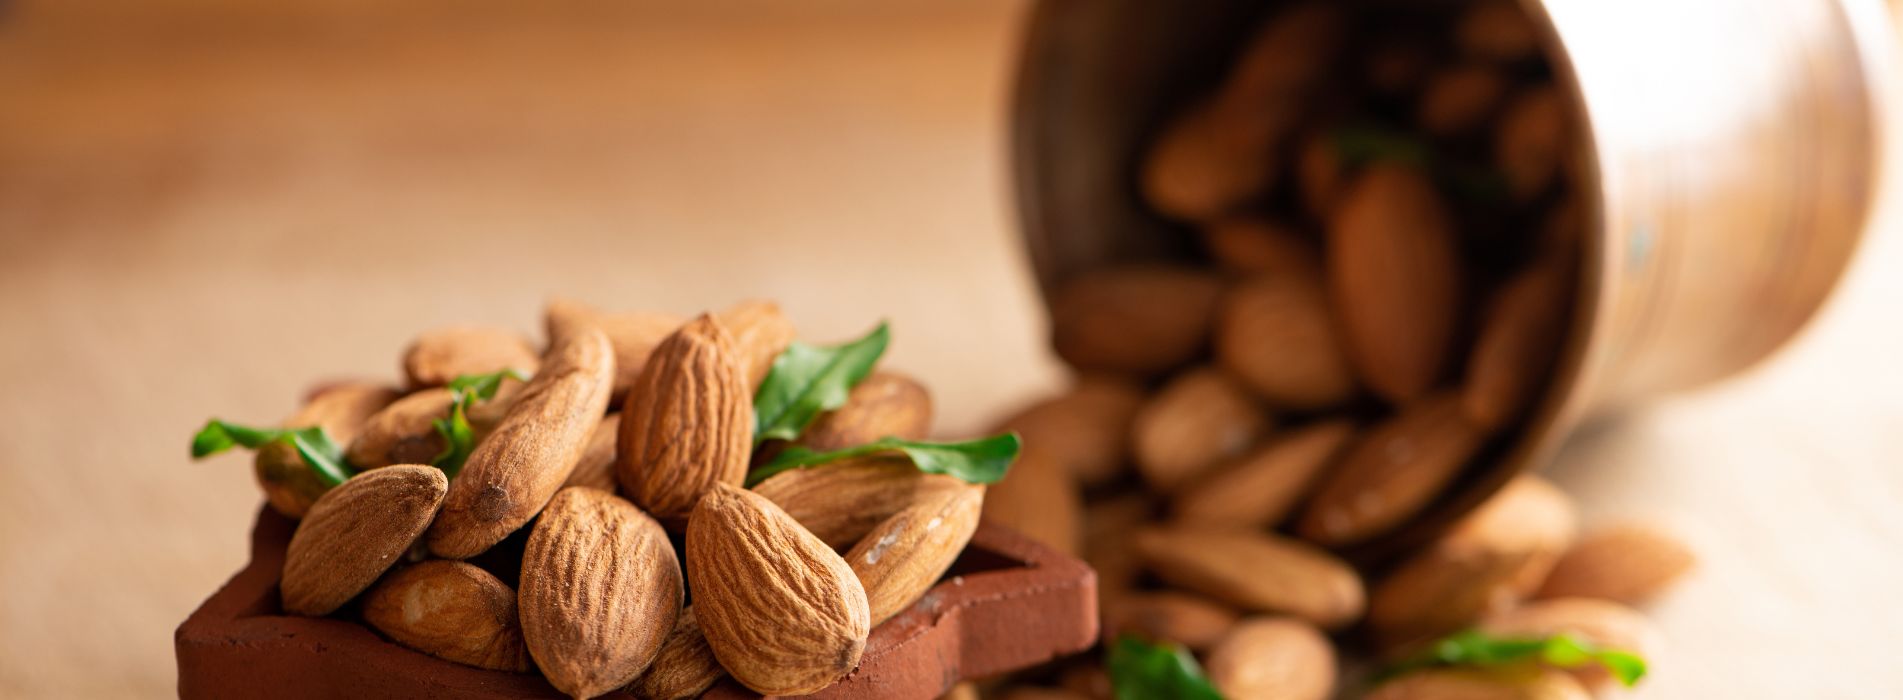 which is healthier almonds or pecans